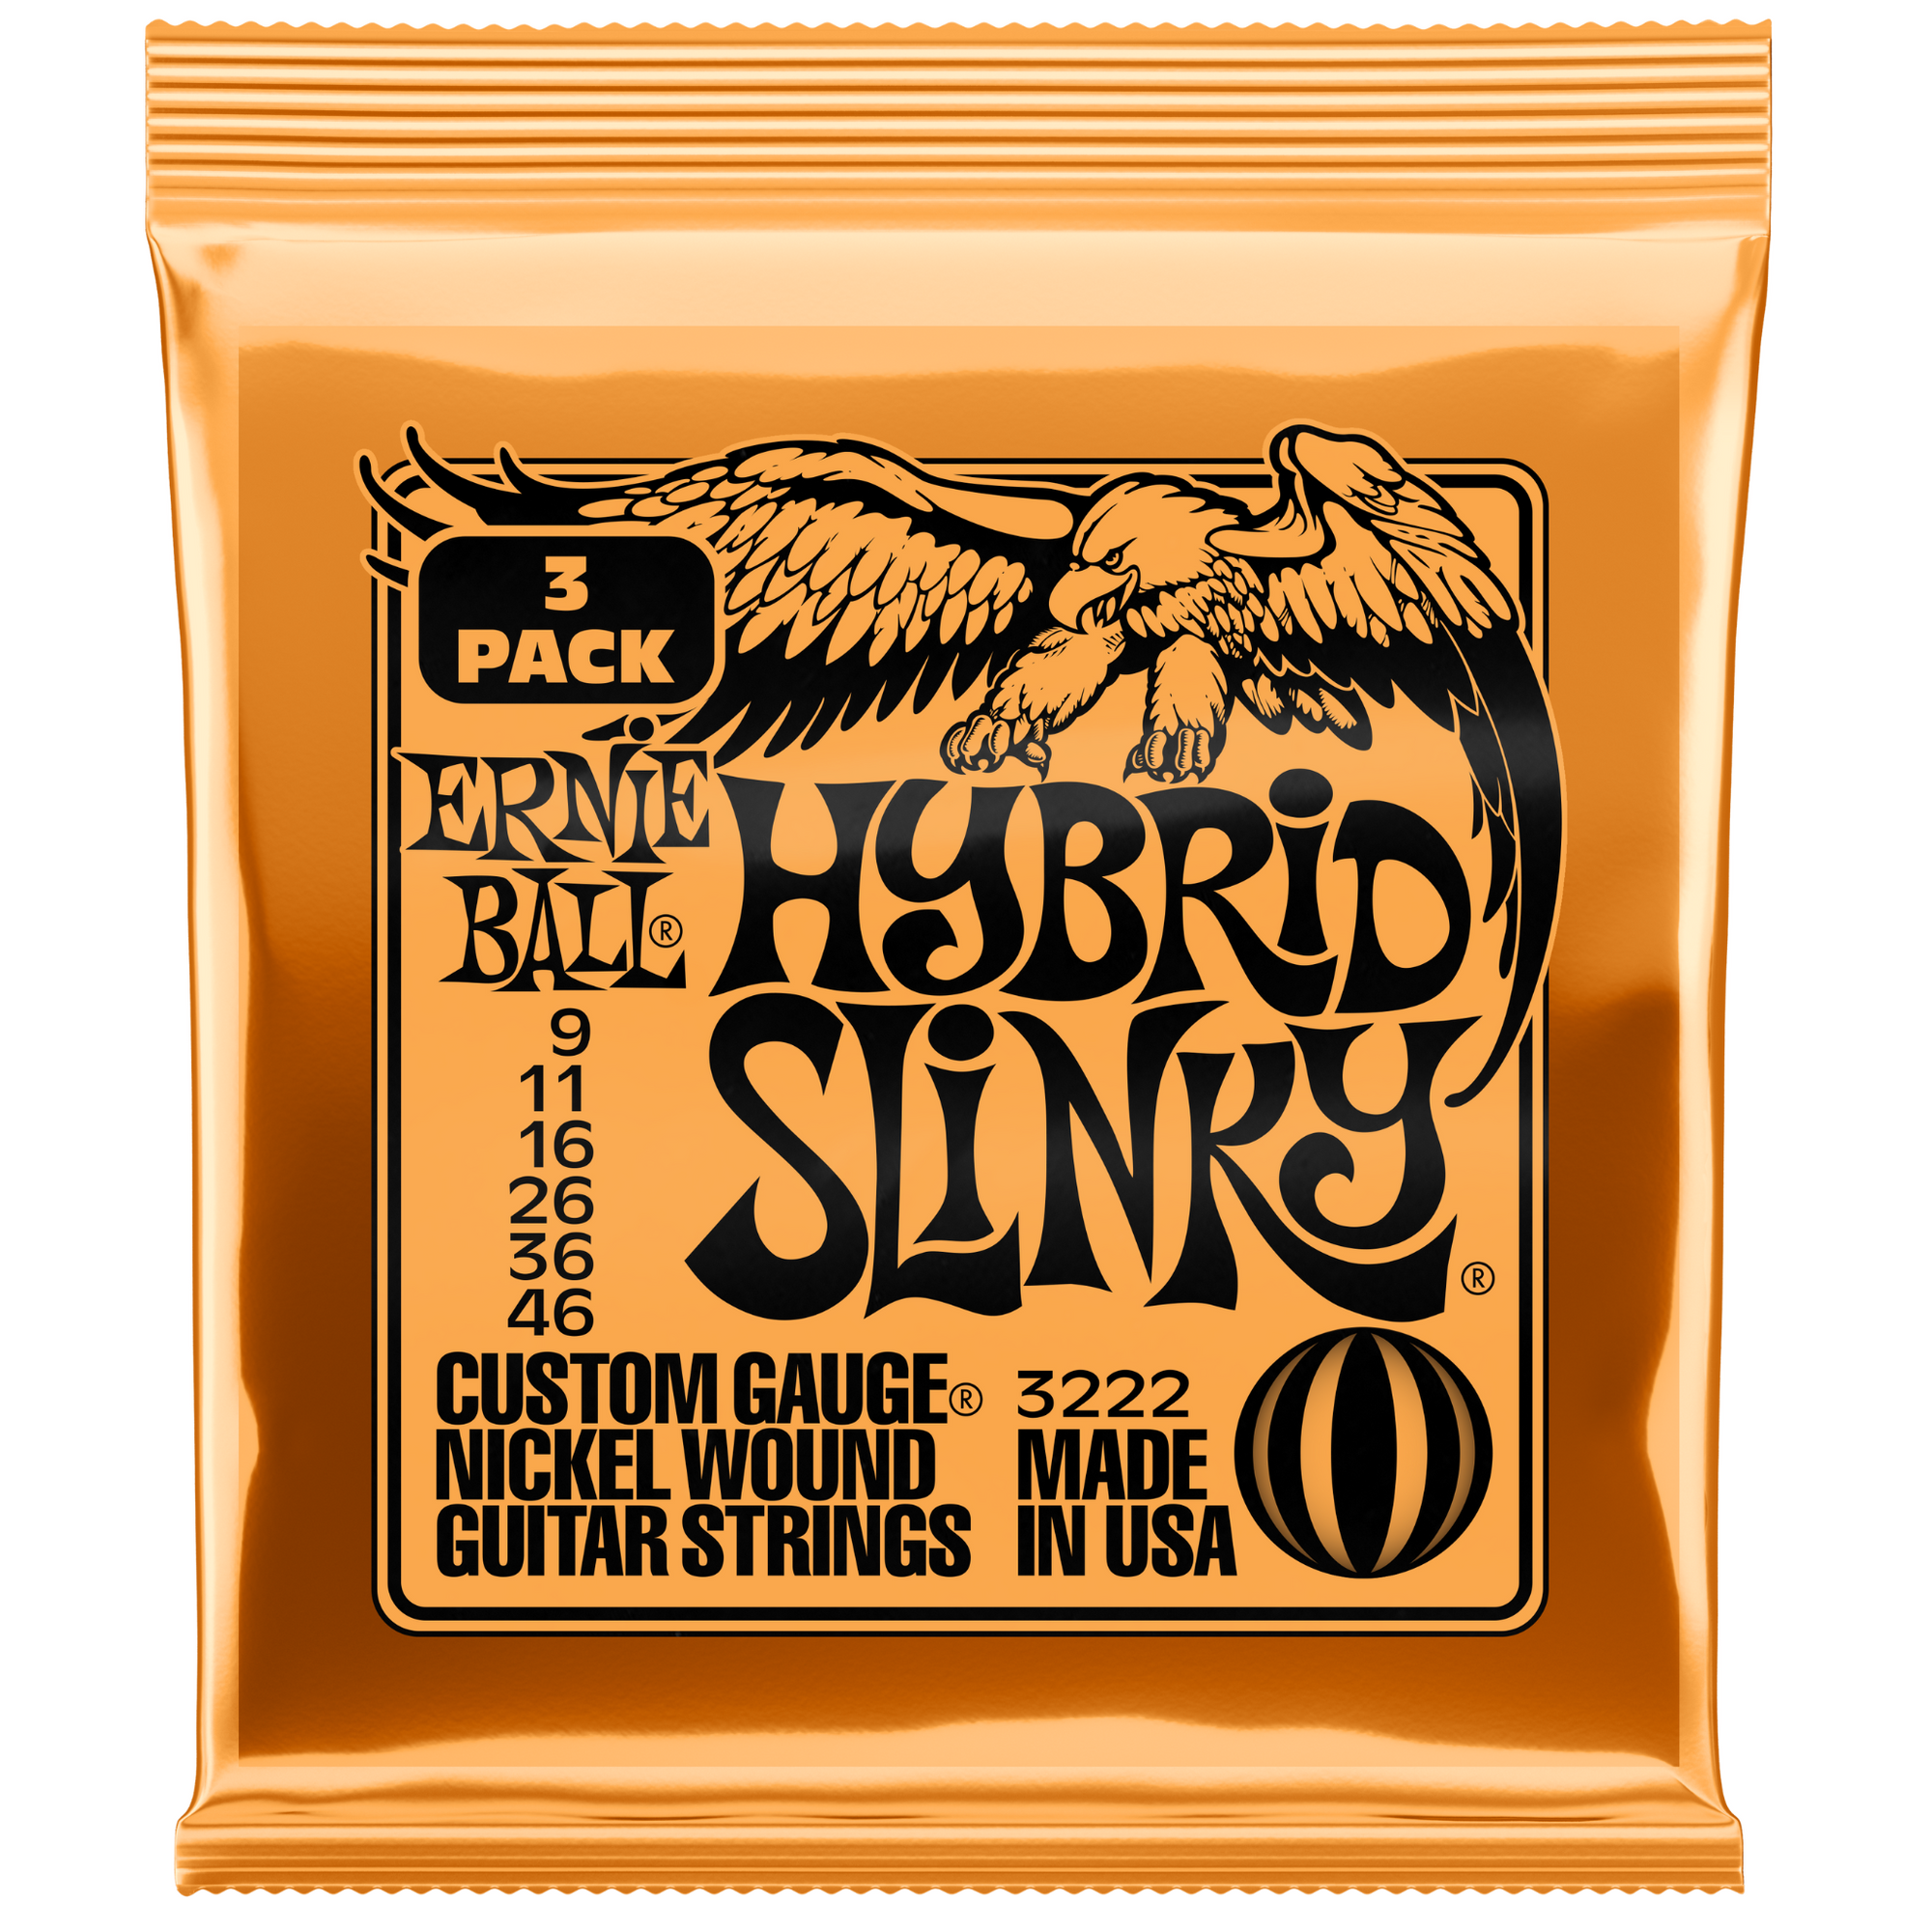 Ernie Ball 3-pack 9-42 Electric Hybrid Slinky Guitar Strings 3222 P03222 Front